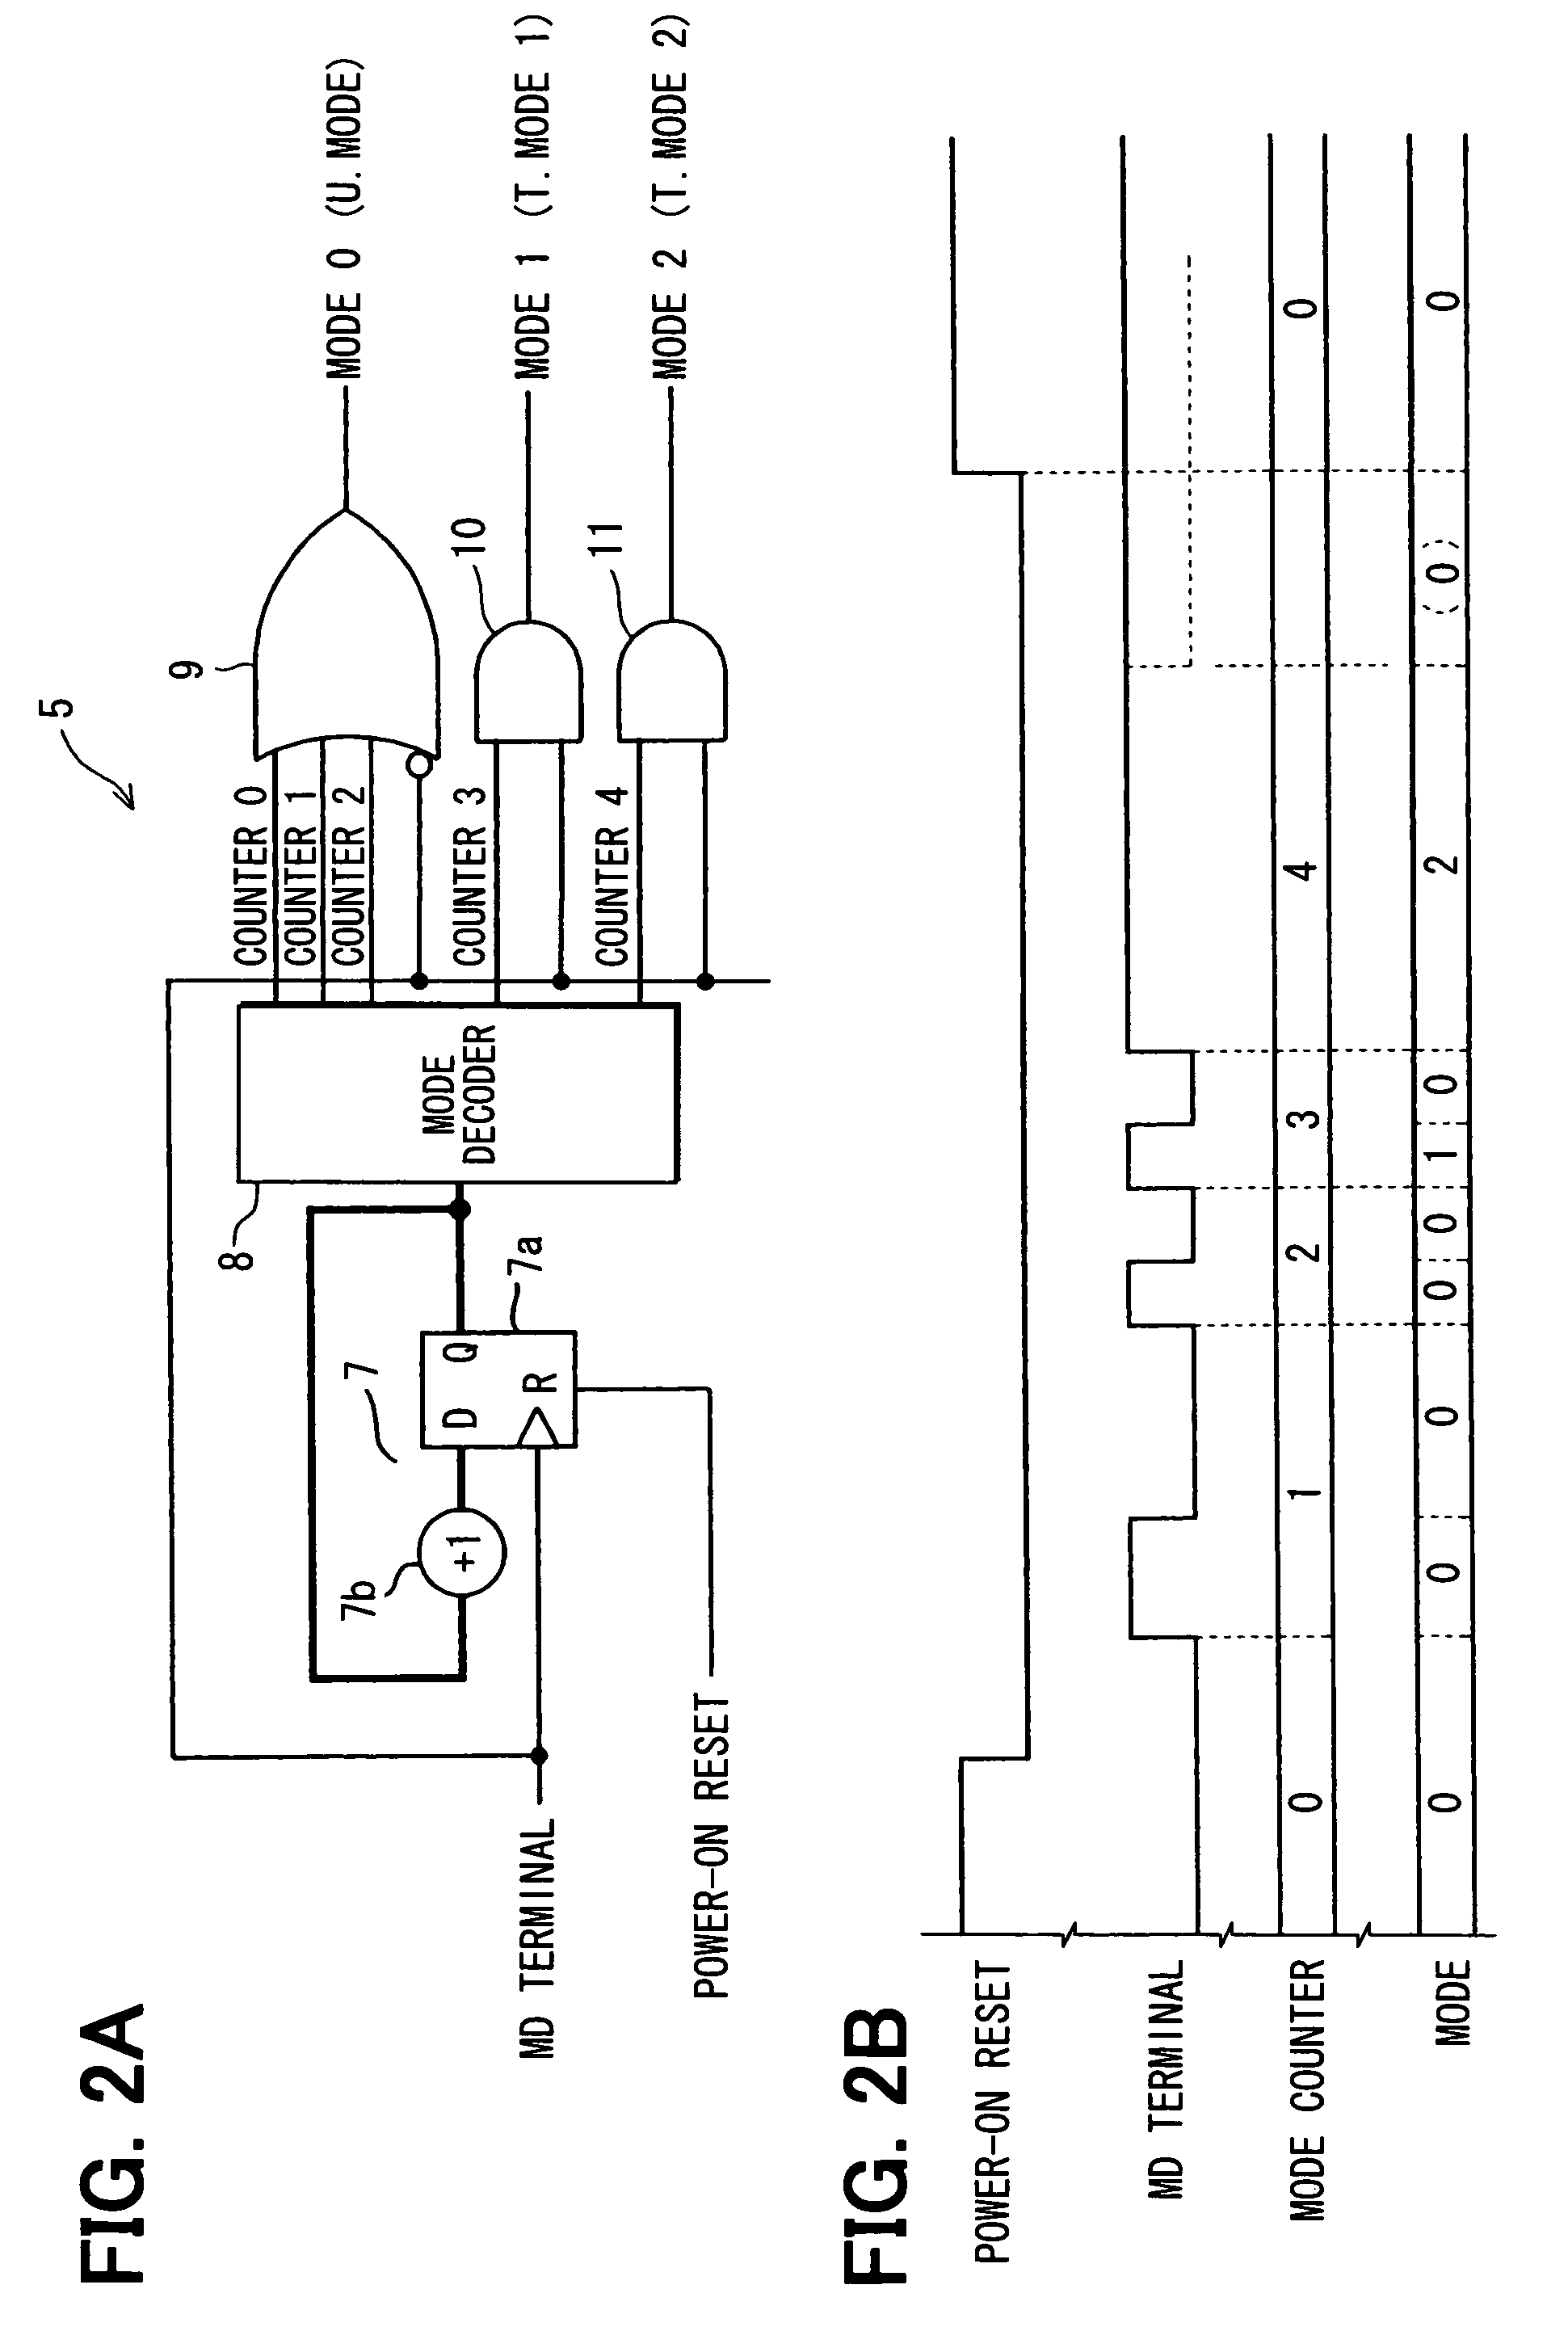 Microcomputer and functional evaluation chip